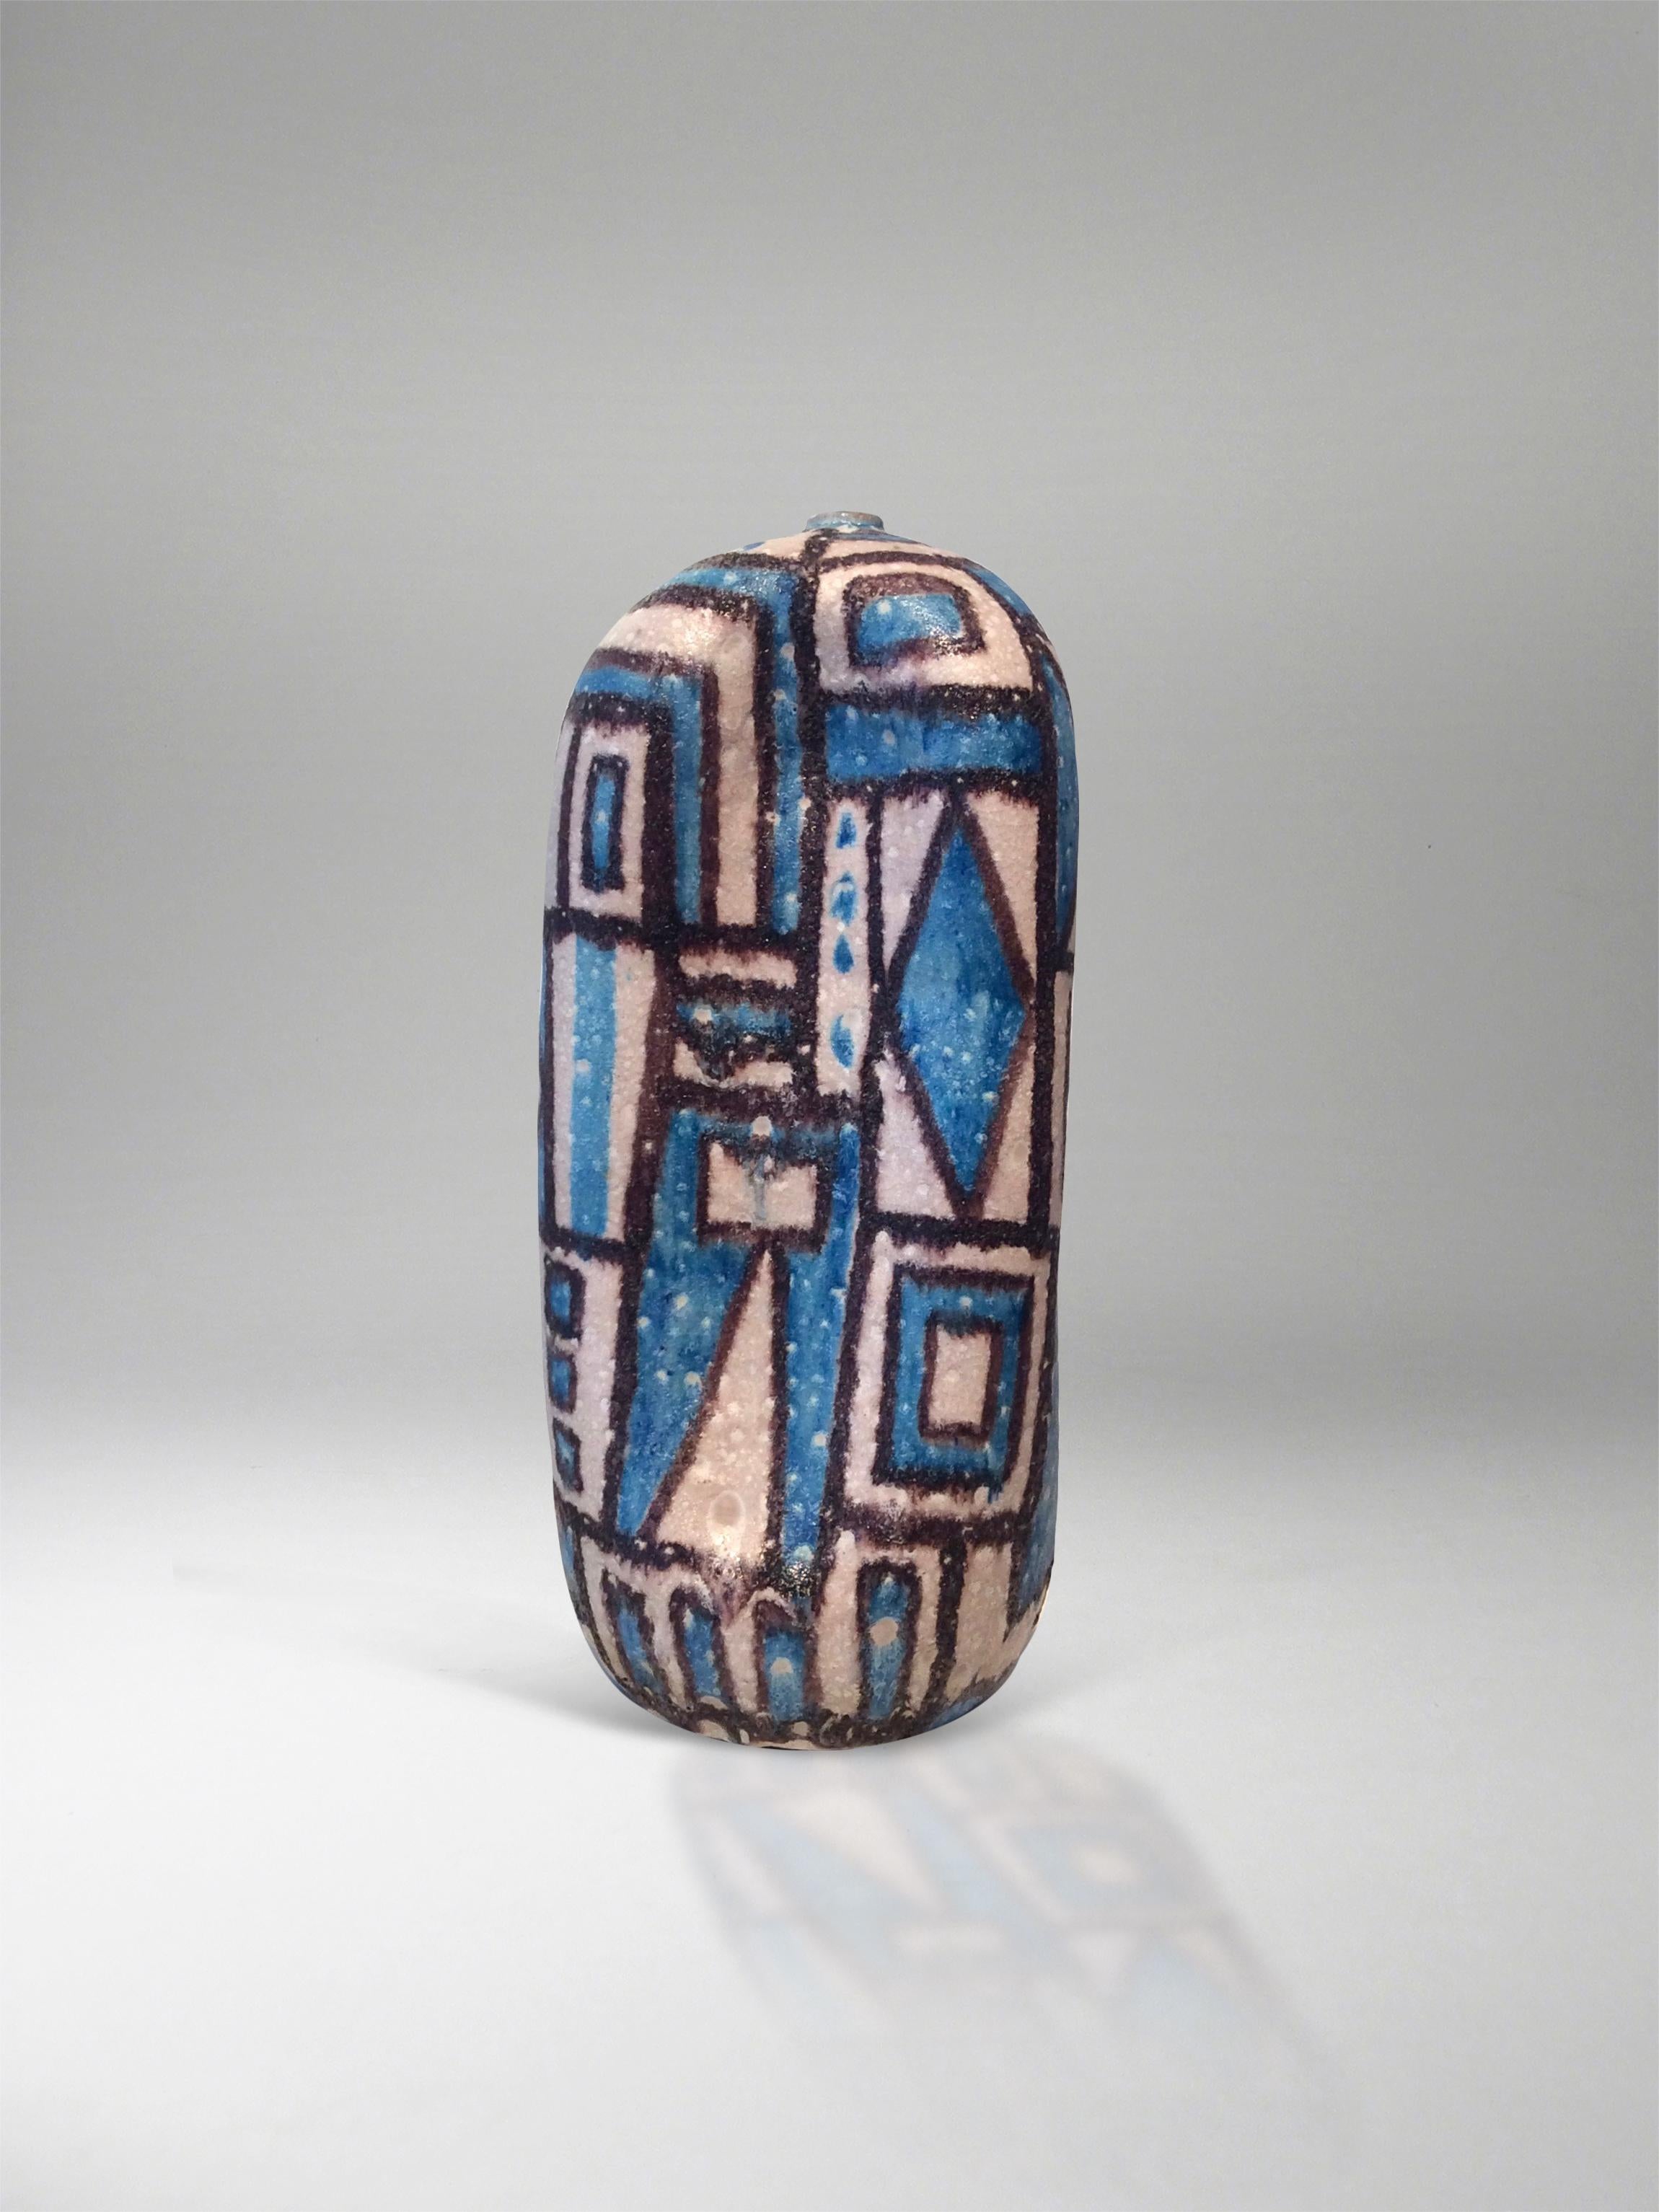 Dynamic, asymmetrical ceramic sculpture glazed in deep brown and rich blue on ivory ground with varied geometric patterns. The sculpture has a narrow neck with small lip and the base has a small hole (which is glazed and so forms part of the